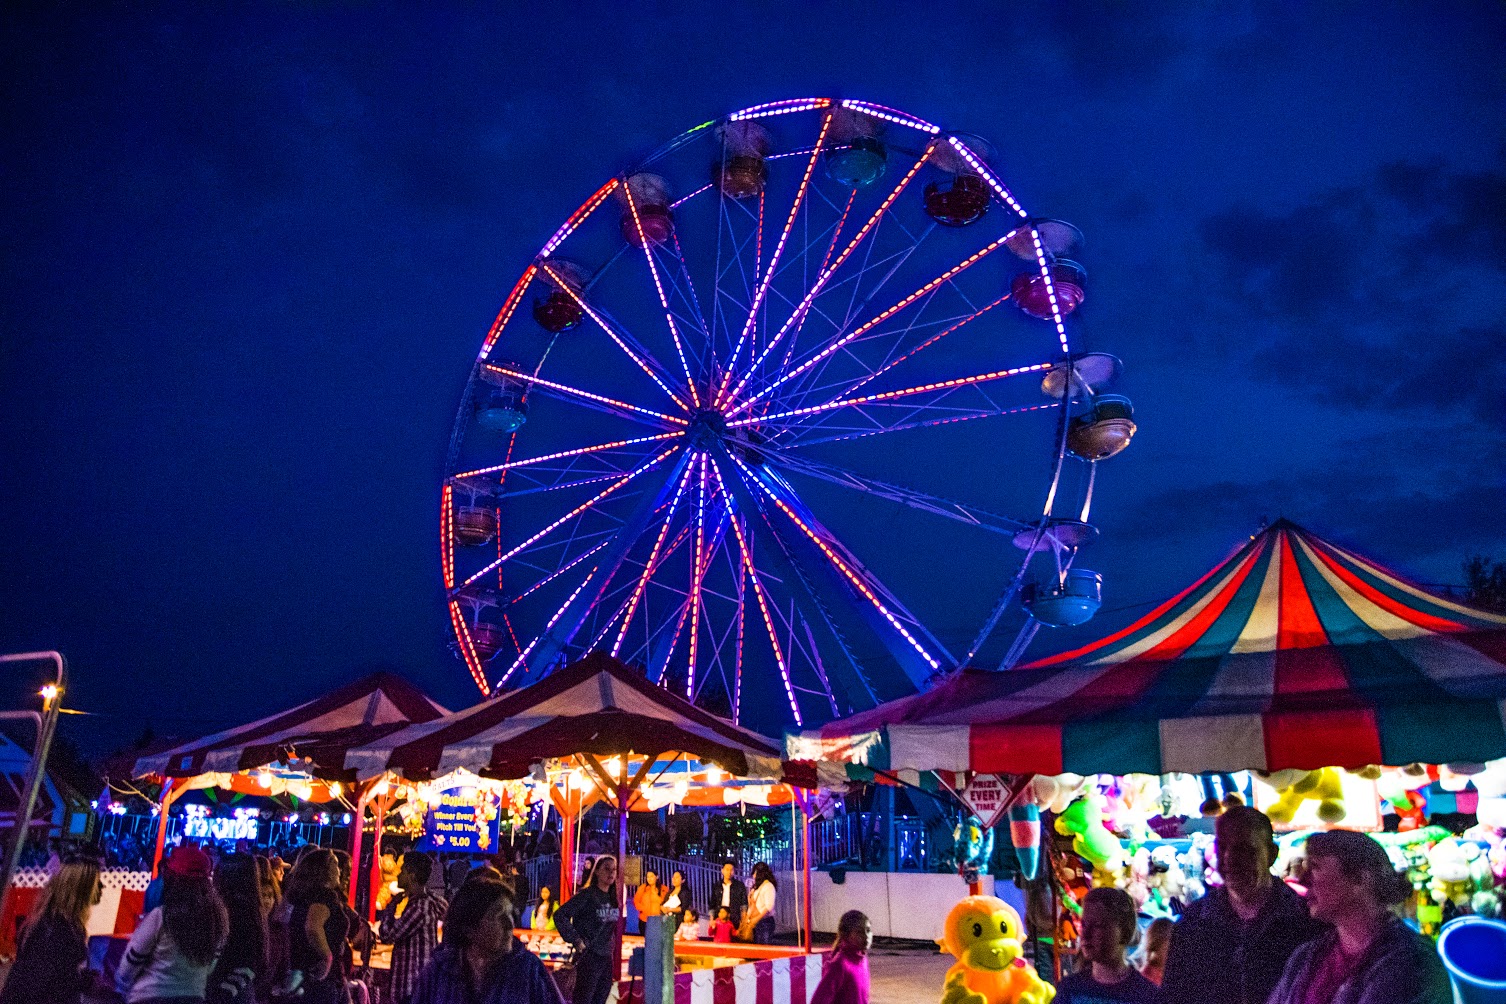 Five Great County Fairs in Washington State